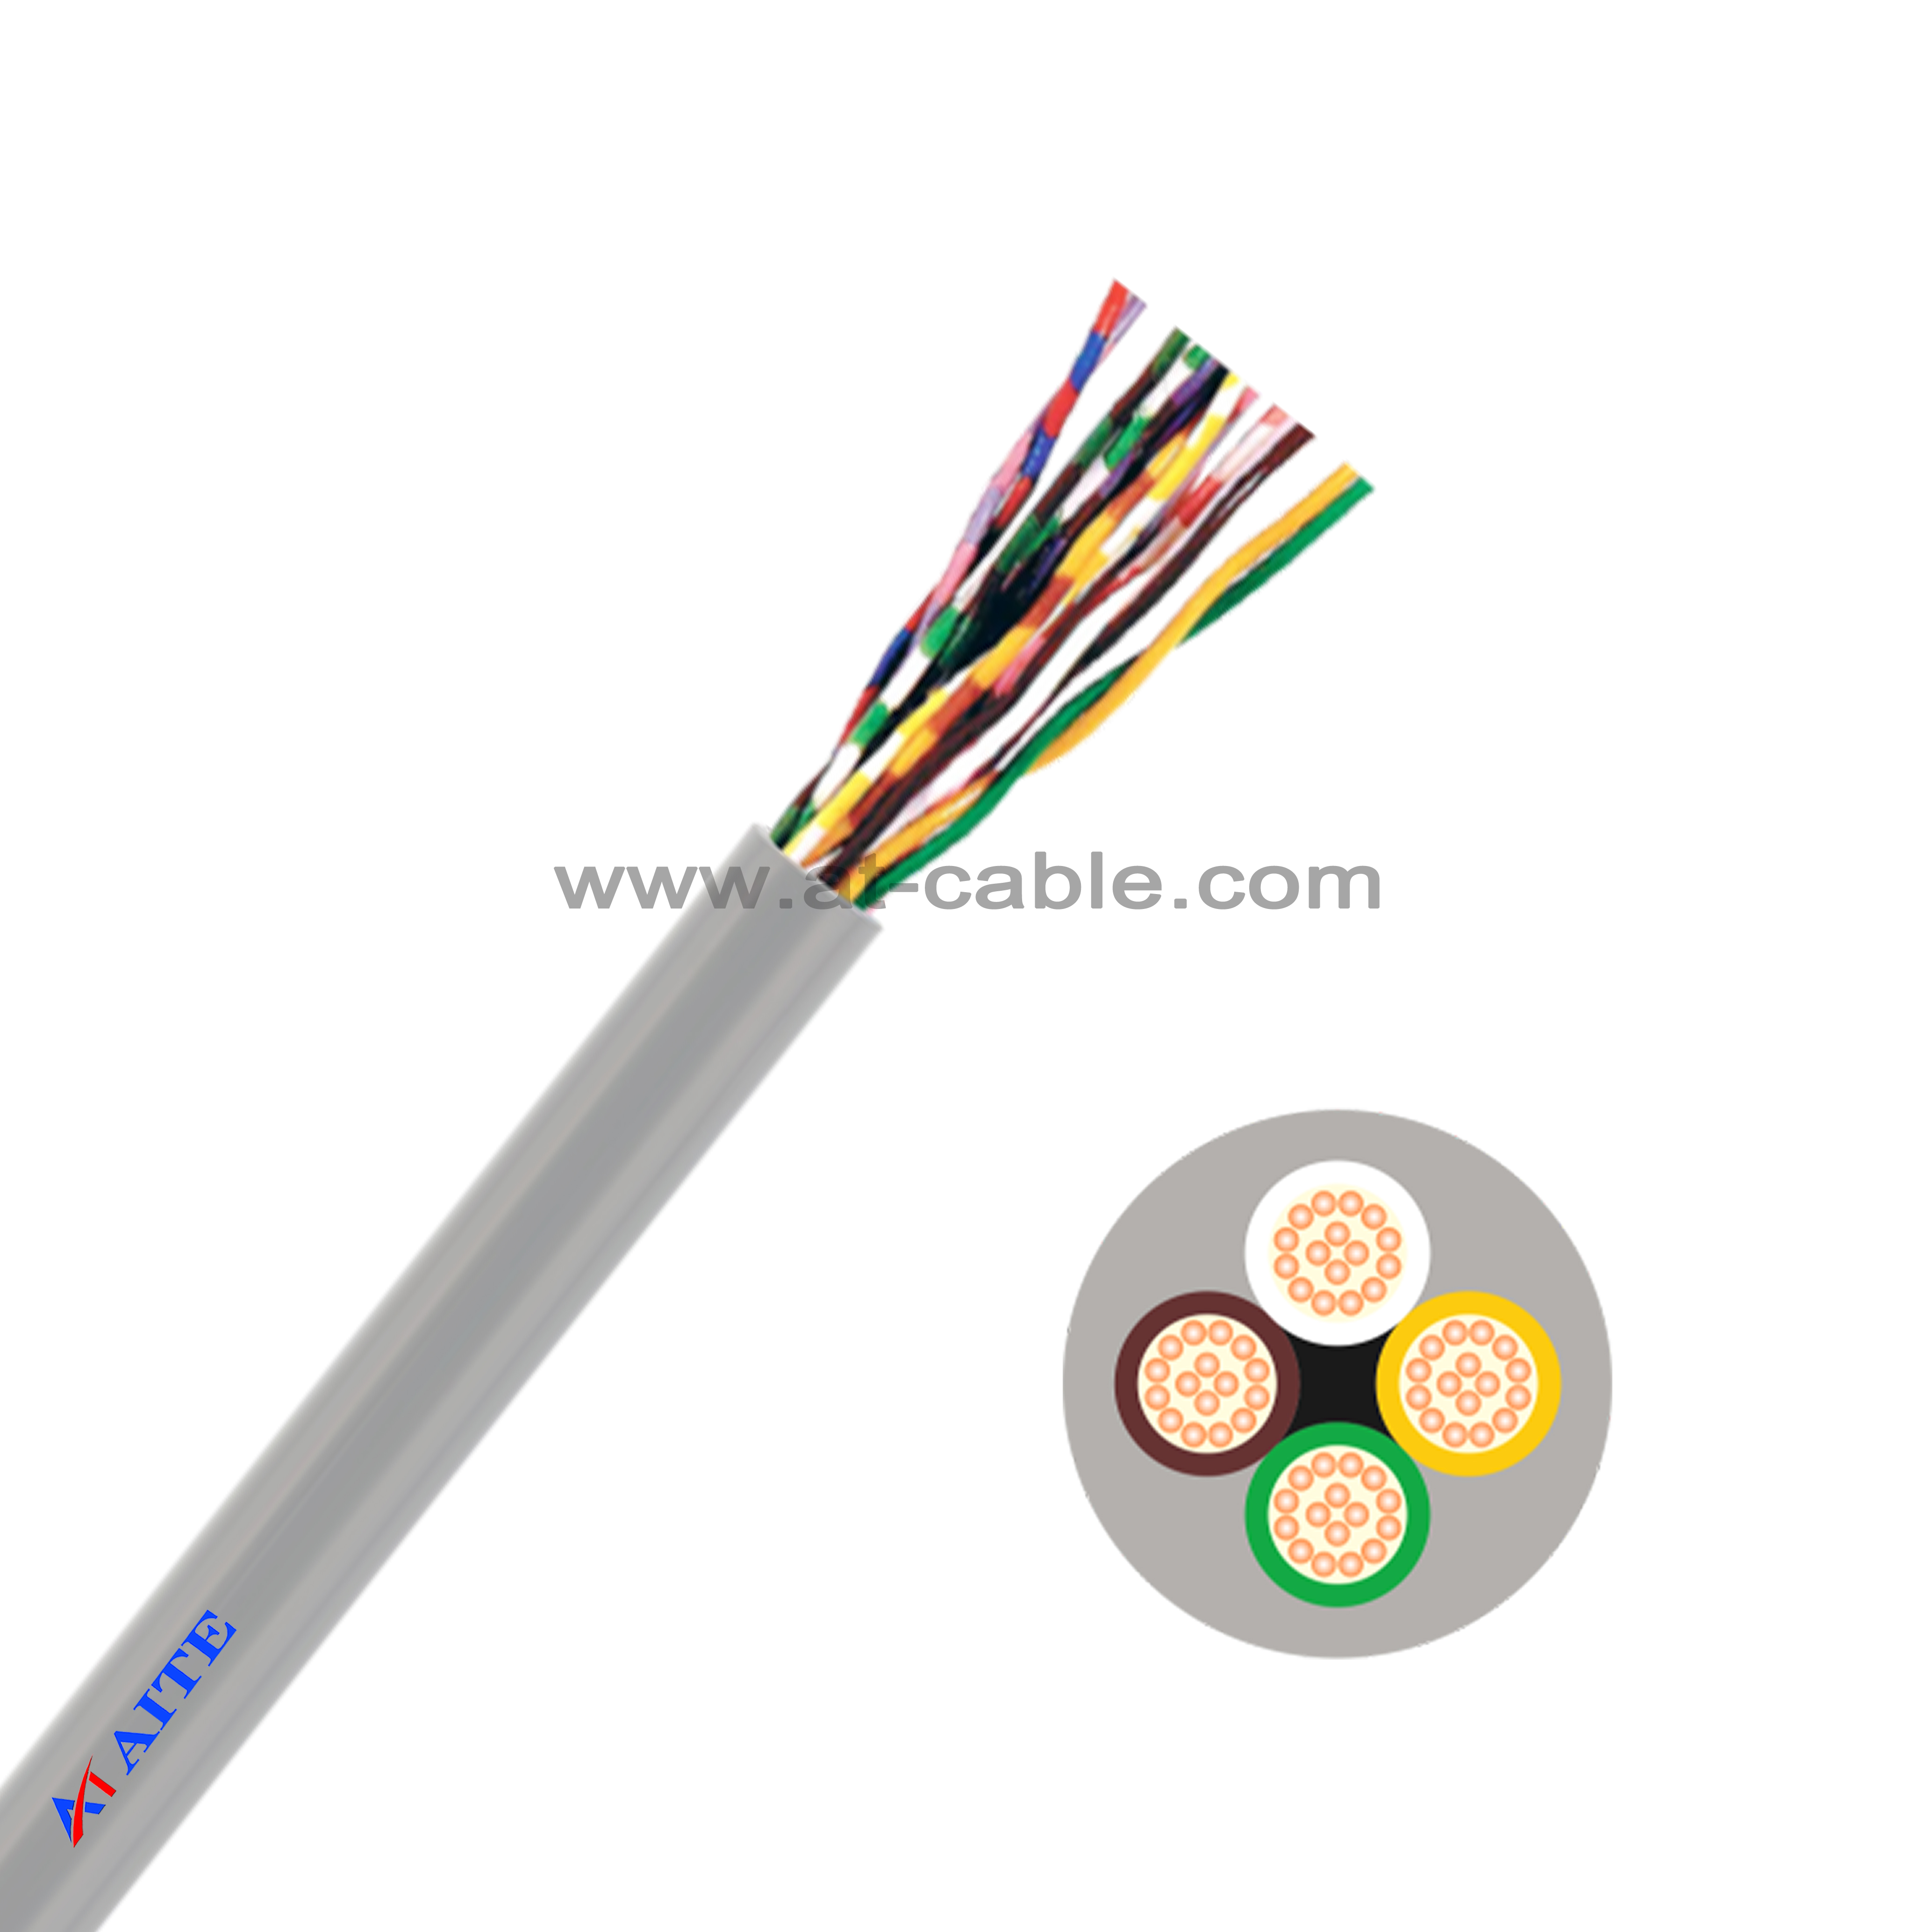 LiYY Control Cable/ Data Cable